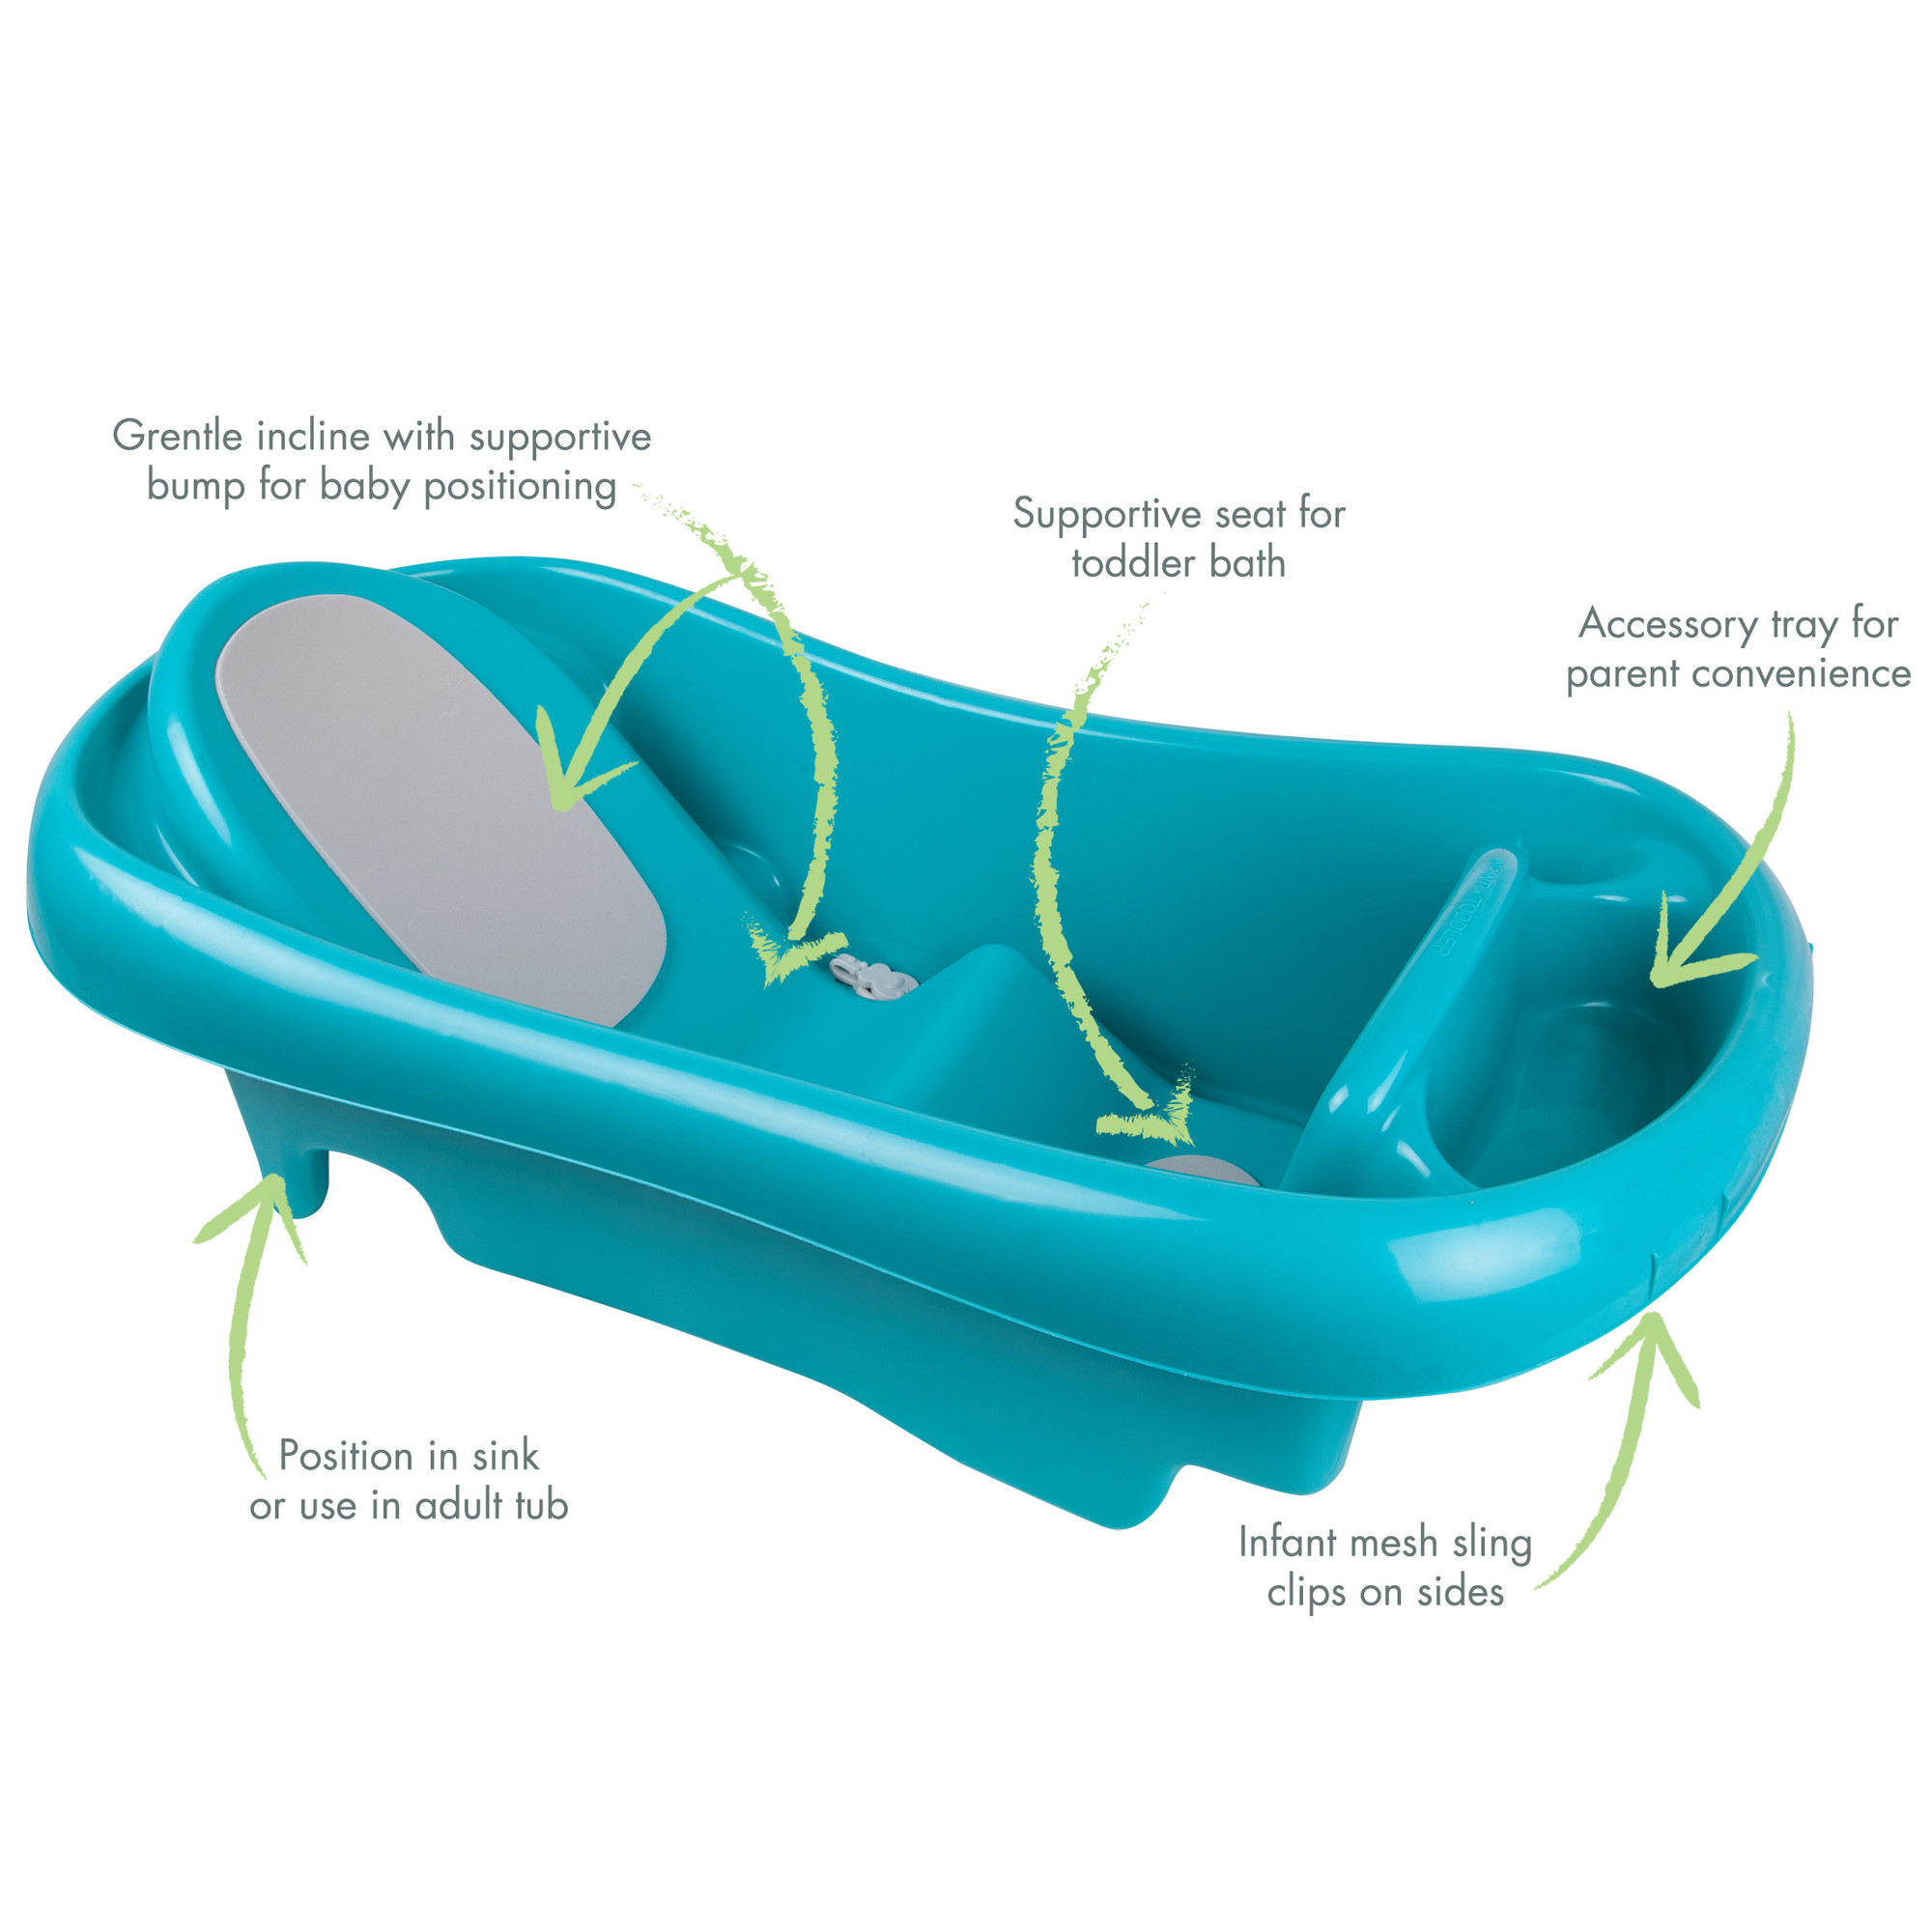 The First Years Sure Comfort Newborn to Toddler Baby Bath Tub, Infant Bath Tub, Teal - image 2 of 6